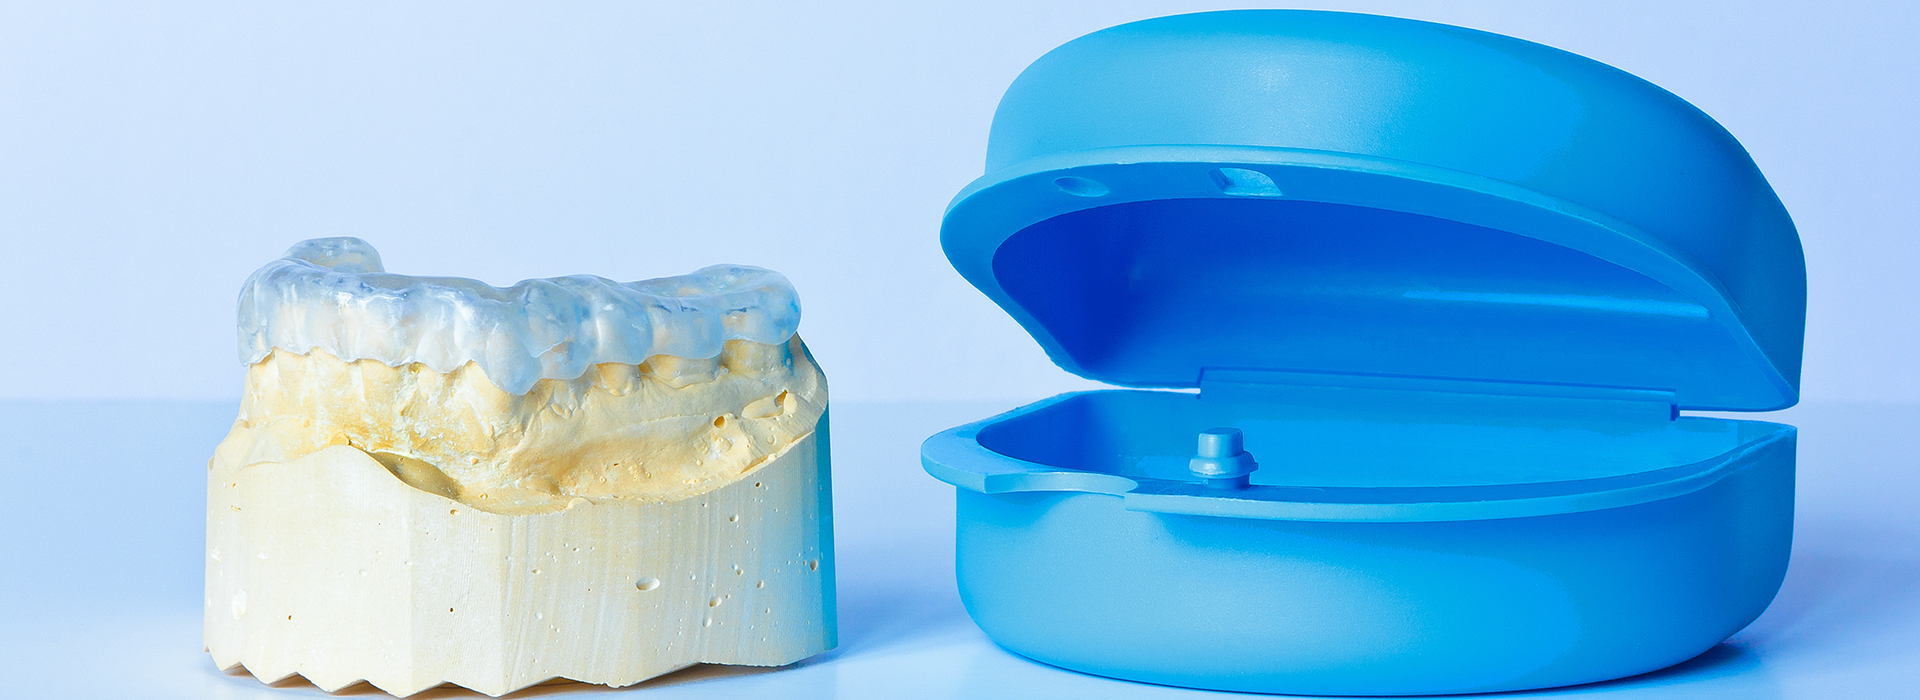 The image shows a blue dental mold next to a yellow dental model, both of which are commonly used in dental offices for creating customized dental appliances.